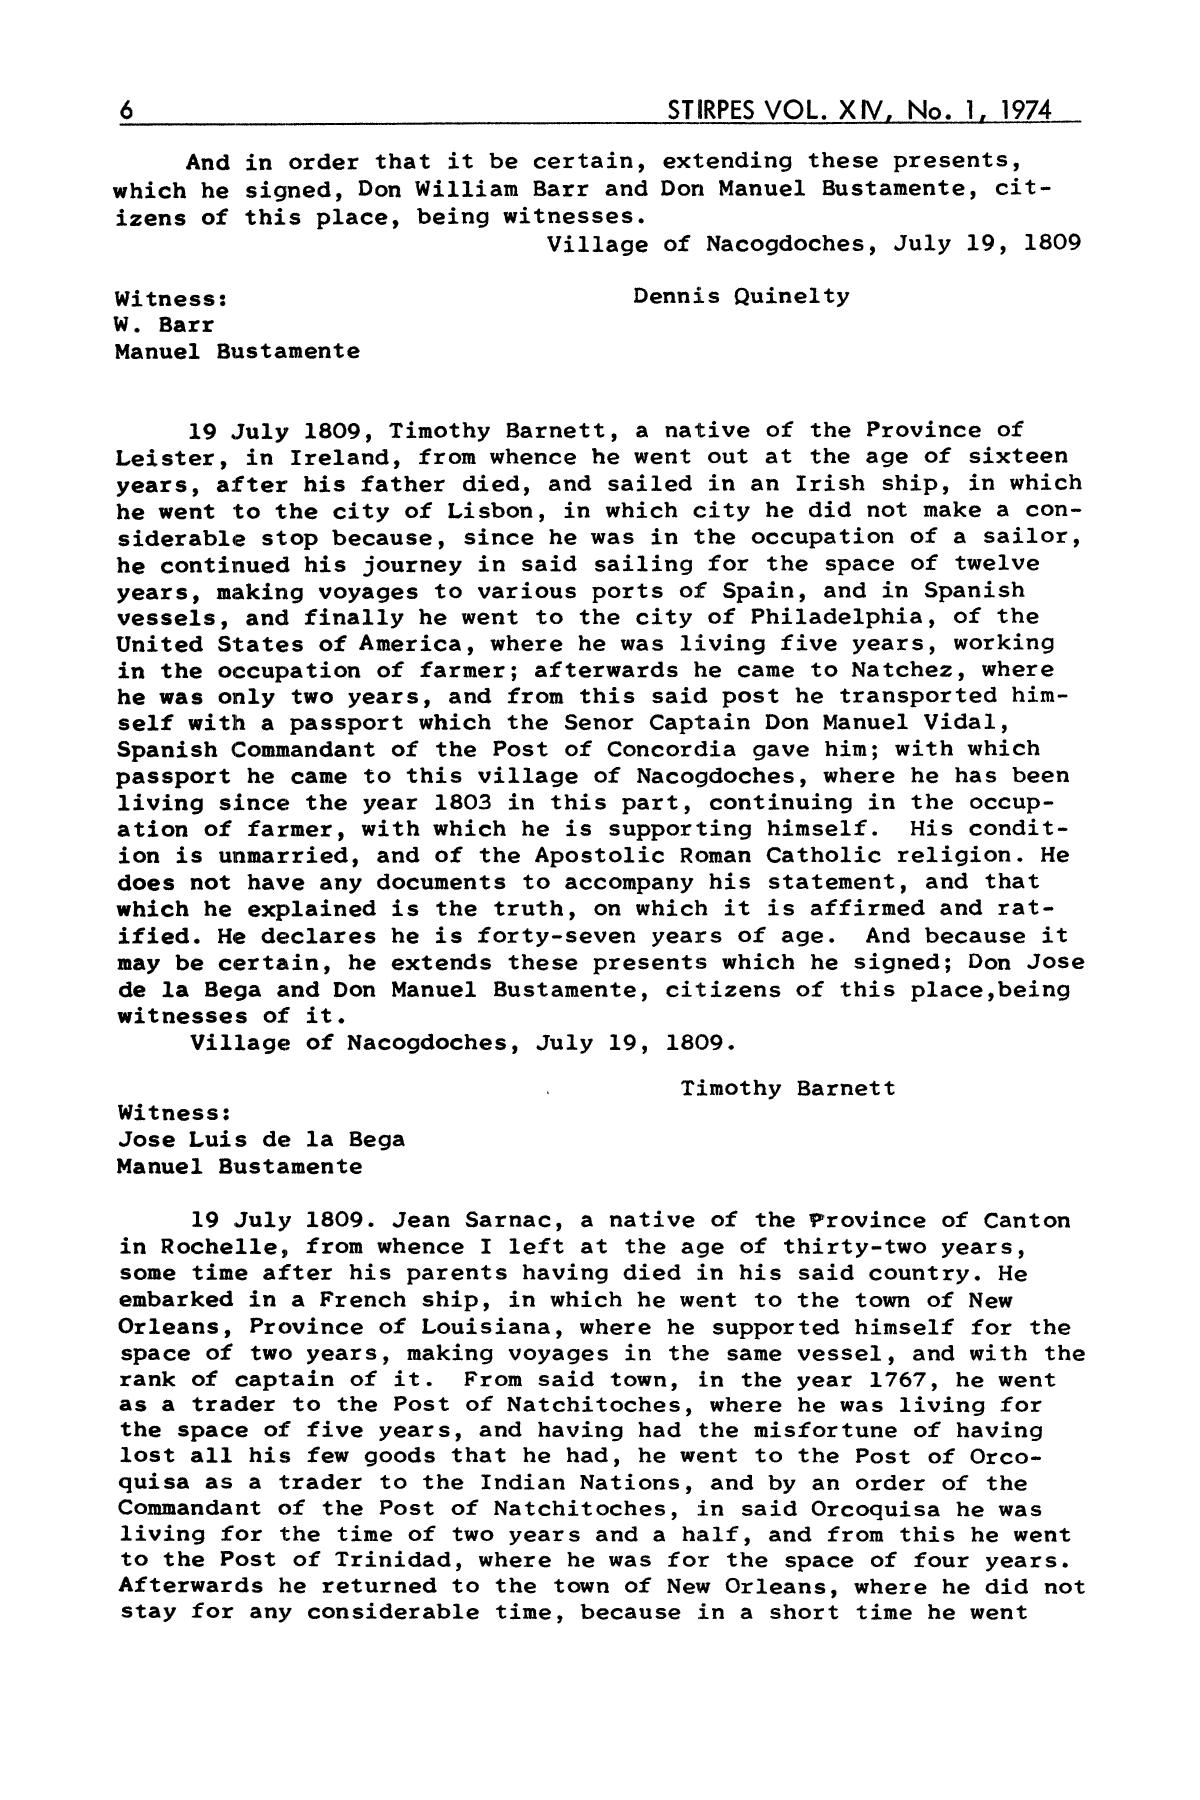 Stirpes, Volume 14, Number 1, March 1974
                                                
                                                    6
                                                